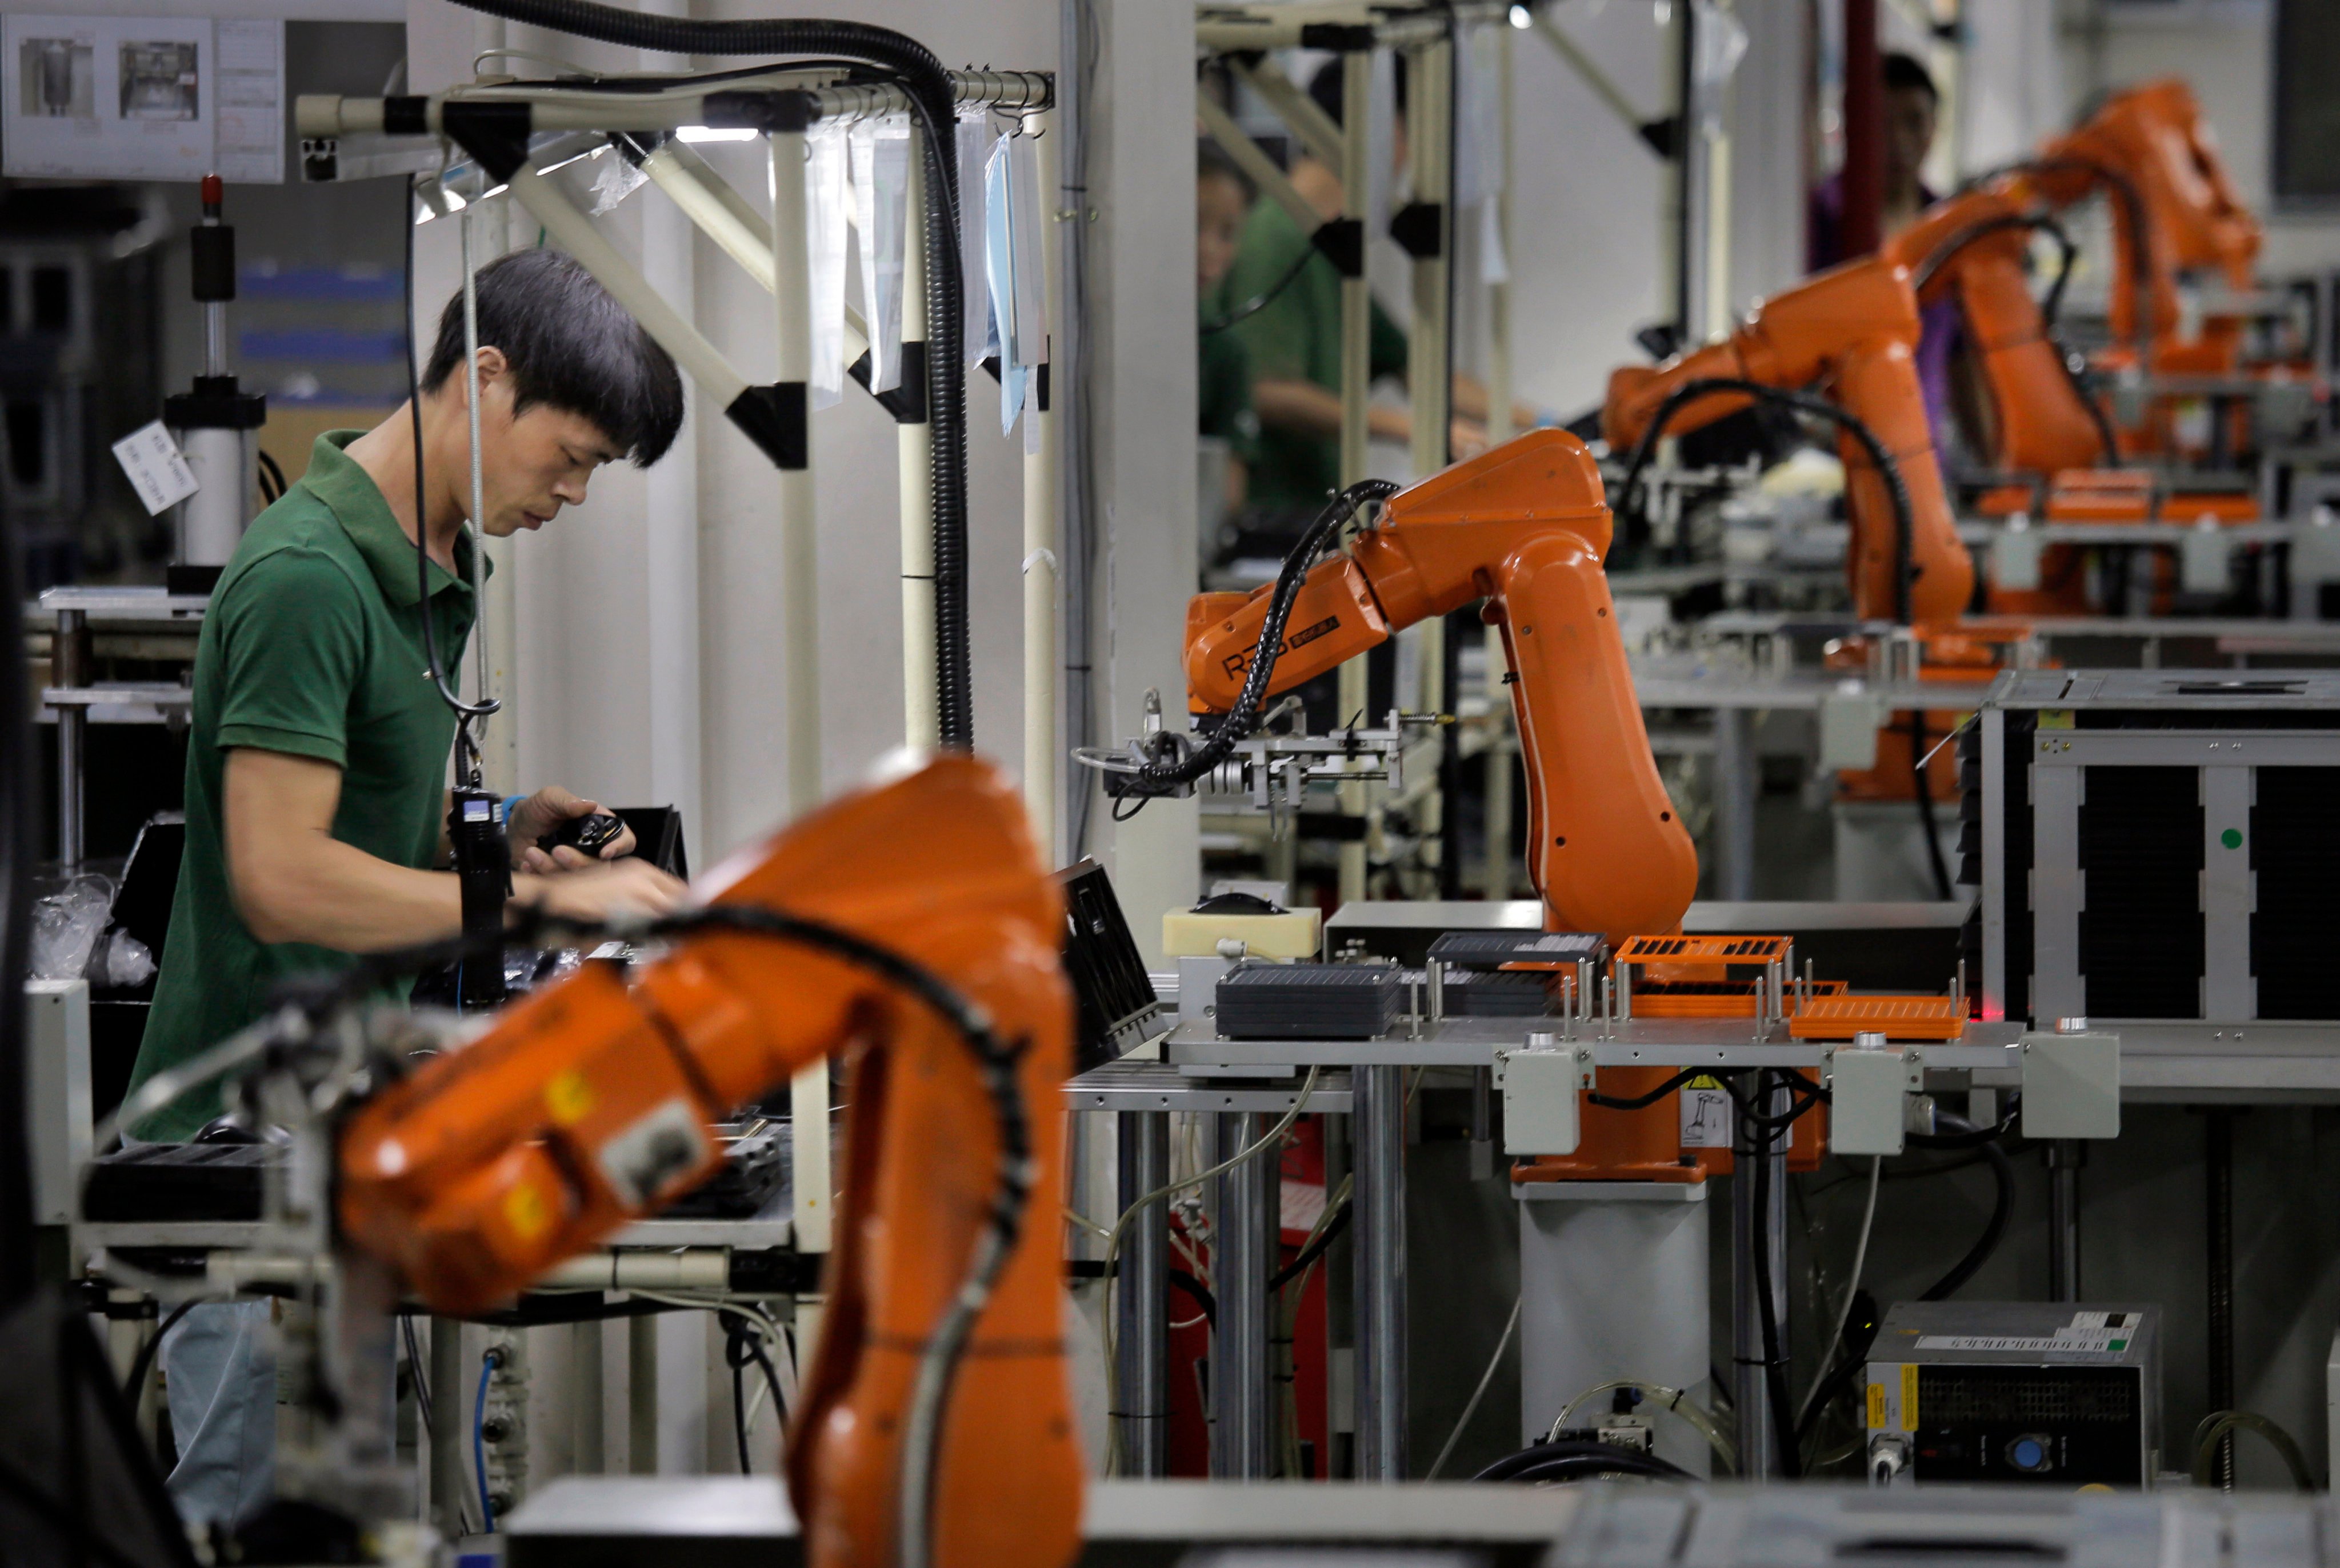 Robotic arms are seen at a factory in China’s Shenzhen, which saw a big rise in exports to kick off the year. Photo: AP